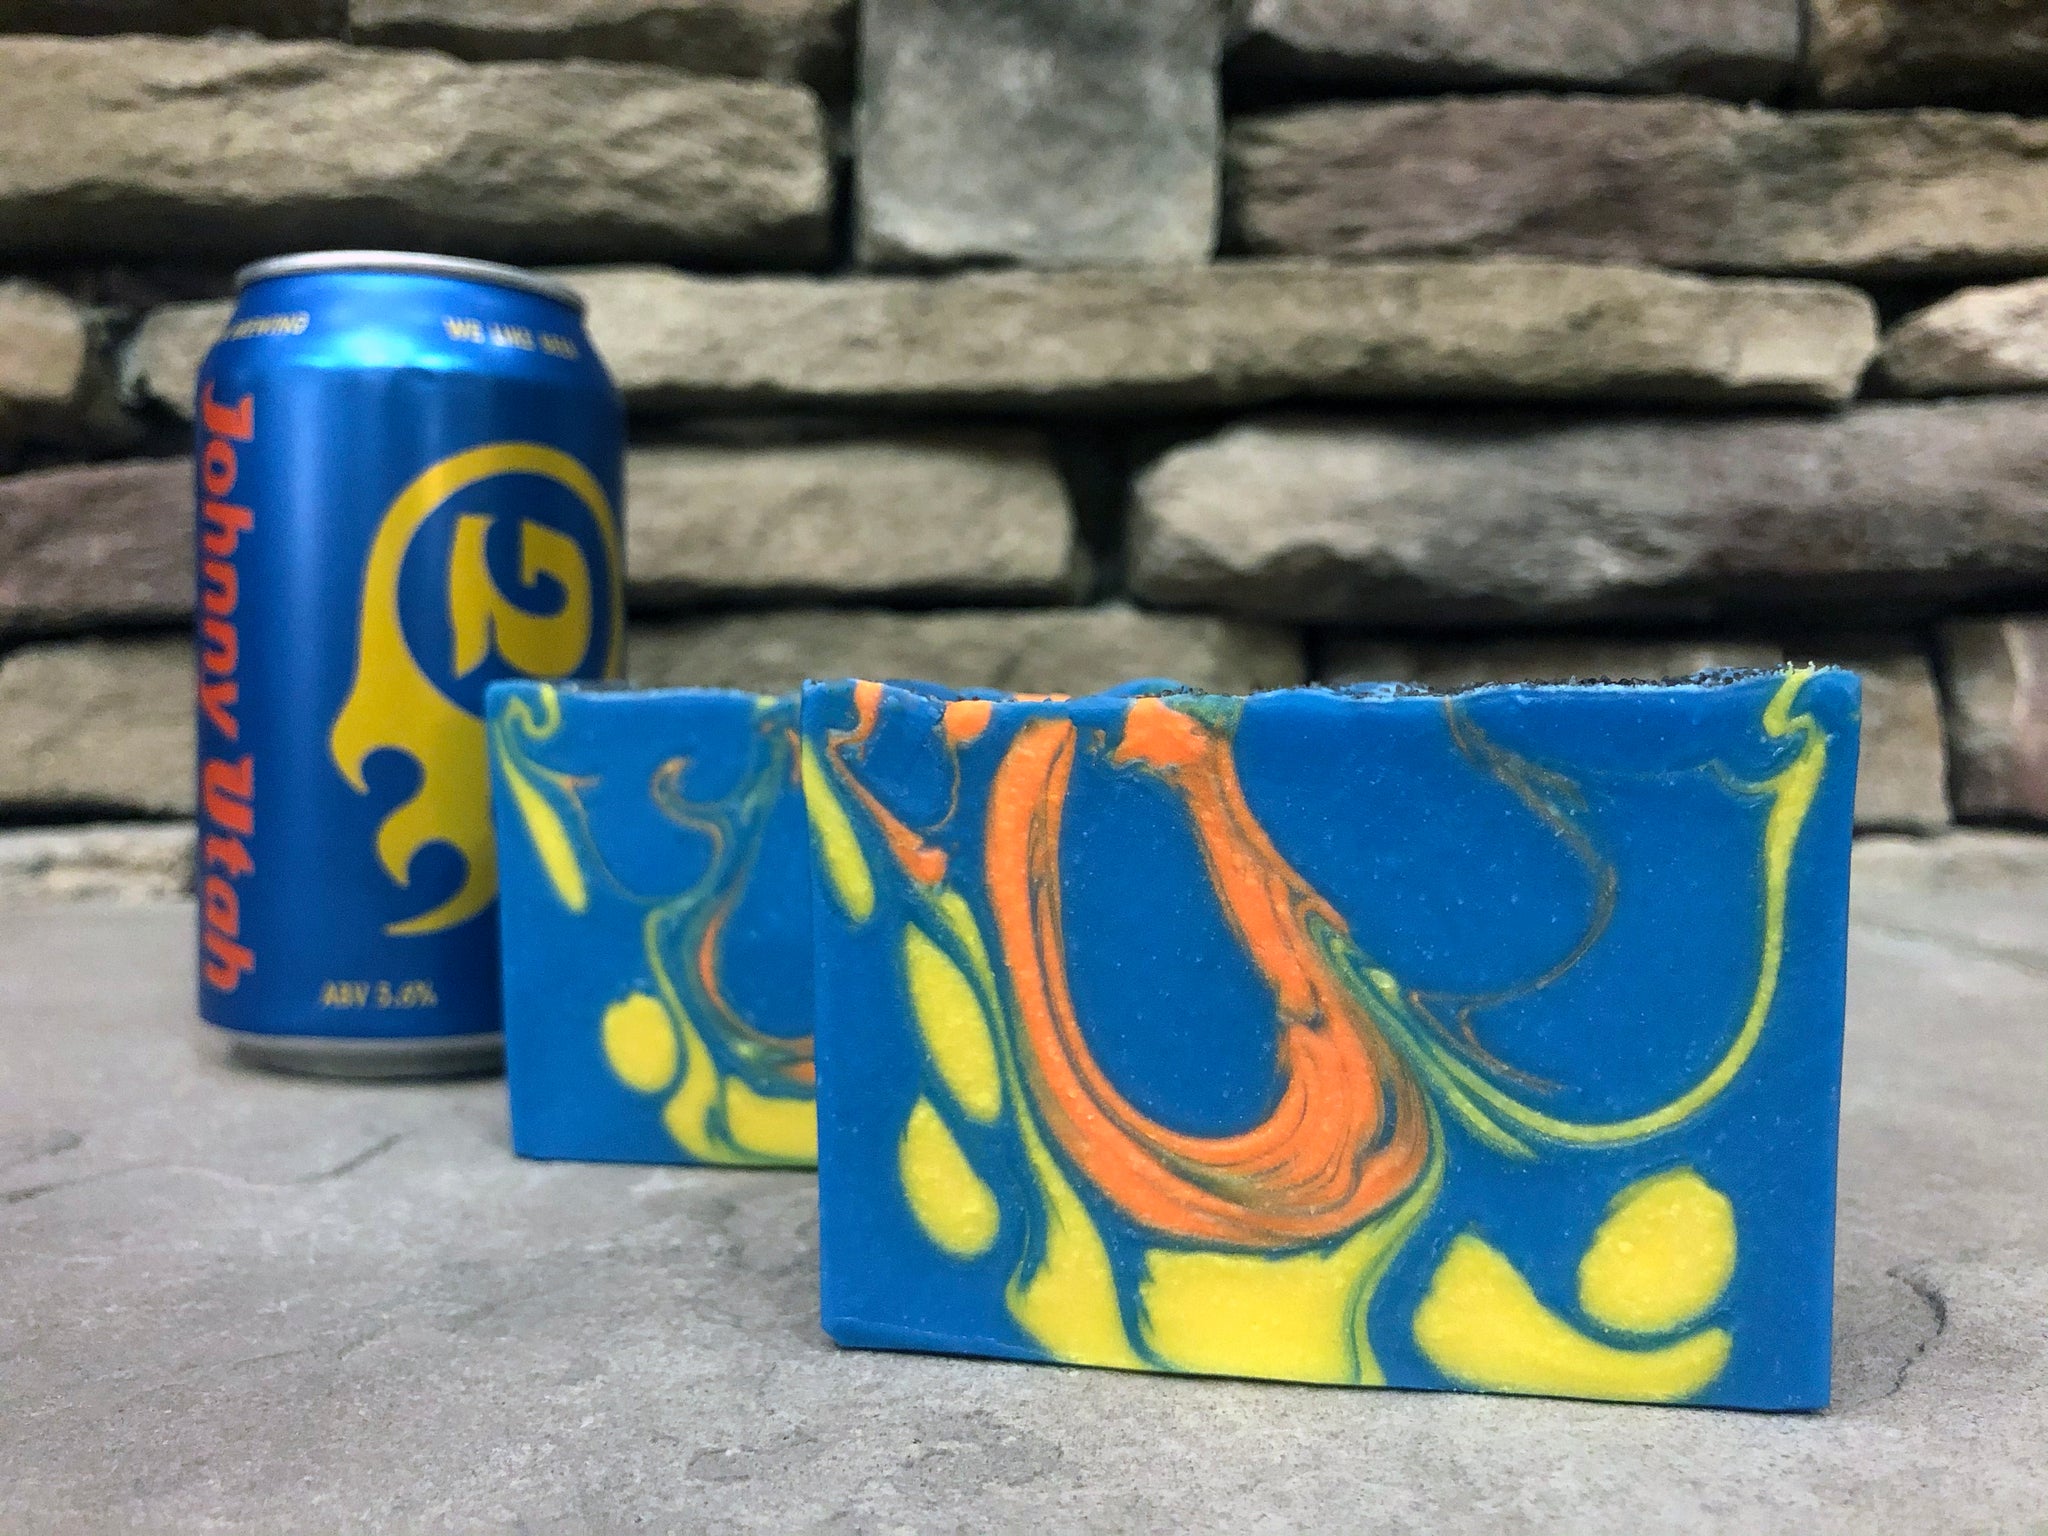 blue yellow and orange craft beer soap handmade with Johnny Utah pale ale from Georgetown brewing company Seattle Washington craft brewery beer soap for him spunkndisorderly craft beer soap